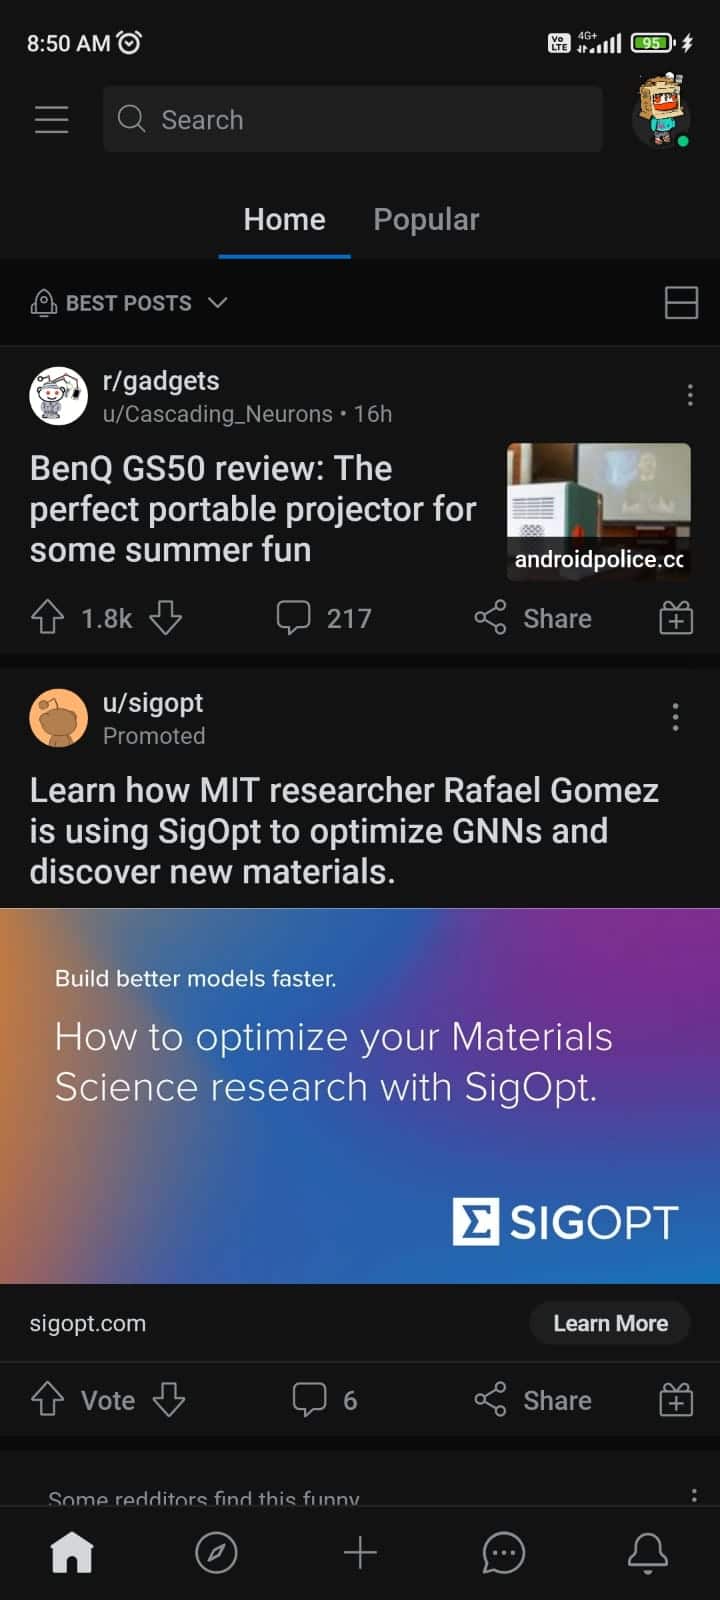 Open the Reddit app on your Android device